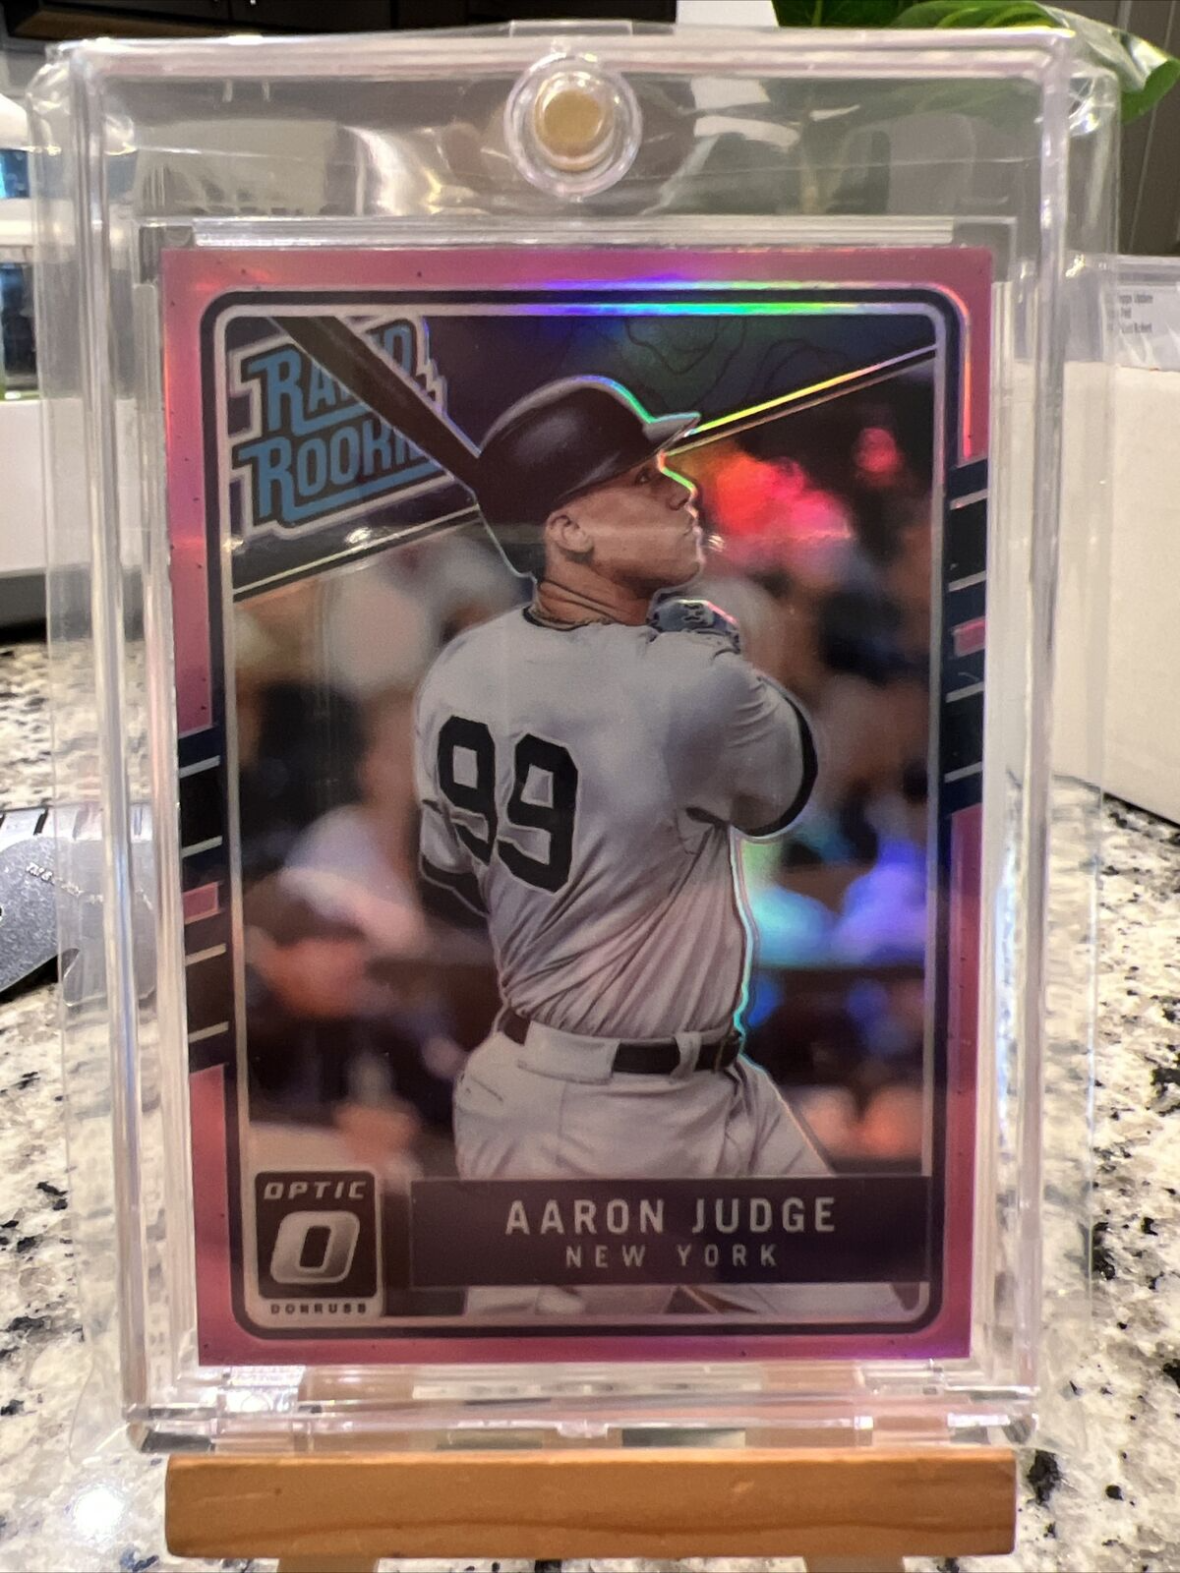 Most valuable Aaron Judge rookie cards: 2017 Donruss Optic Aaron Judge Rookie Card #6 